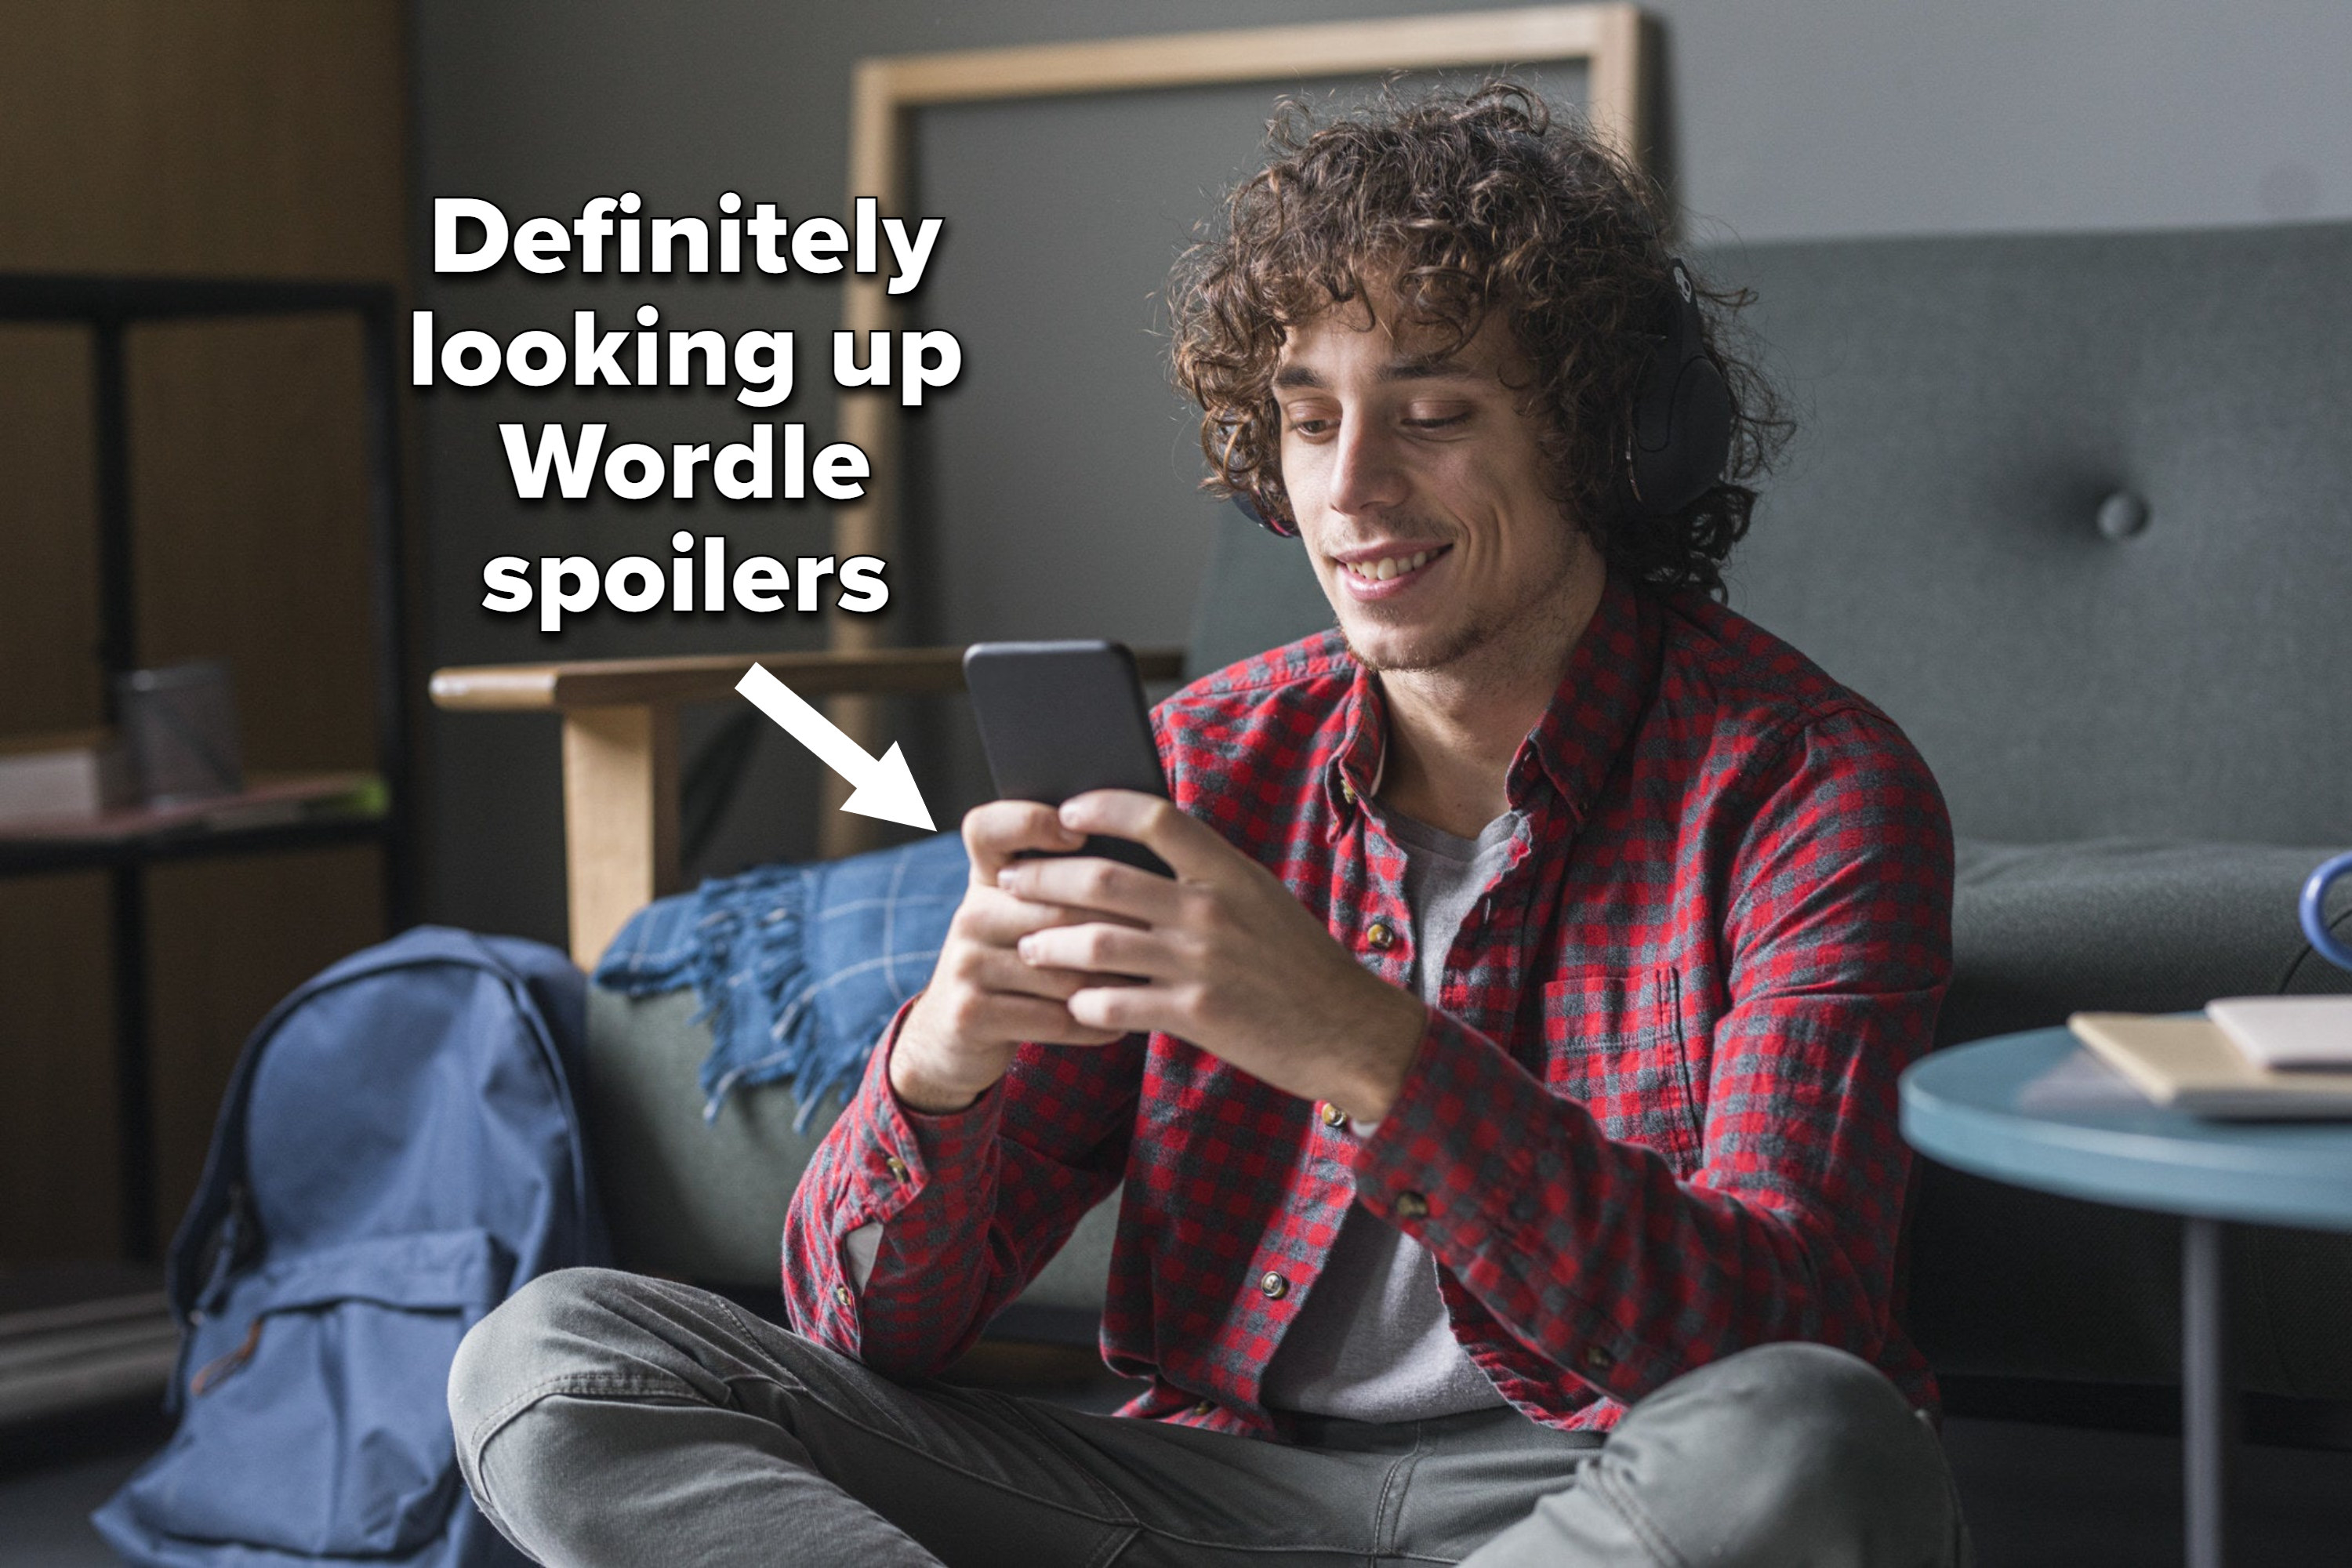 A guy sitting cross-legged on the floor looking at his phone with the caption &quot;Definitely looking up Wordle spoilers&quot;